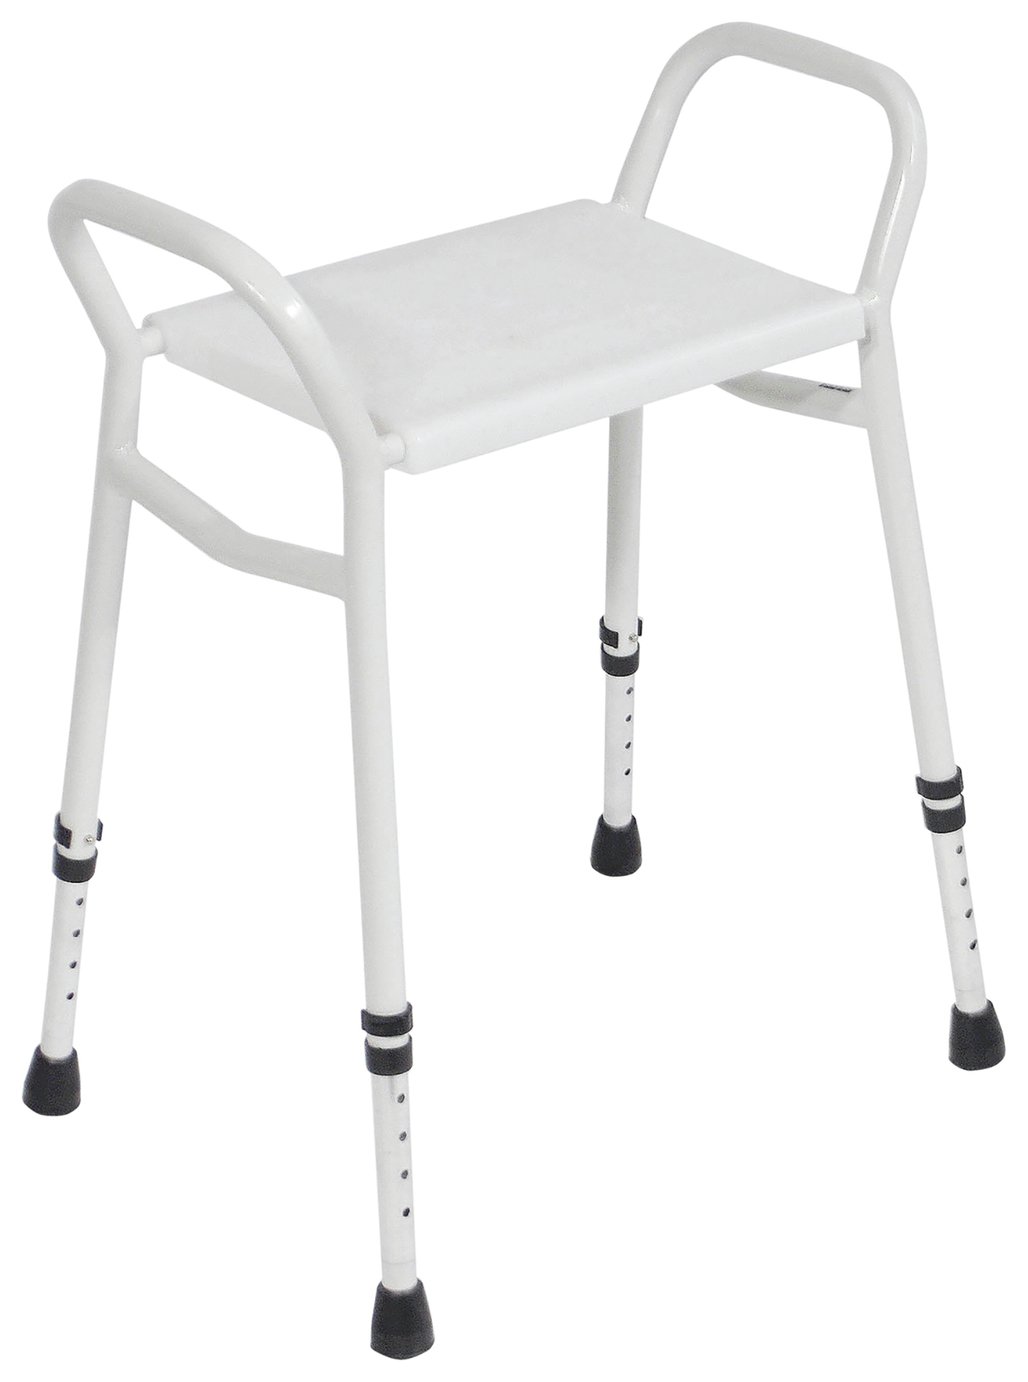 Aidapt Strood Adjustable Height Shower Stool Review